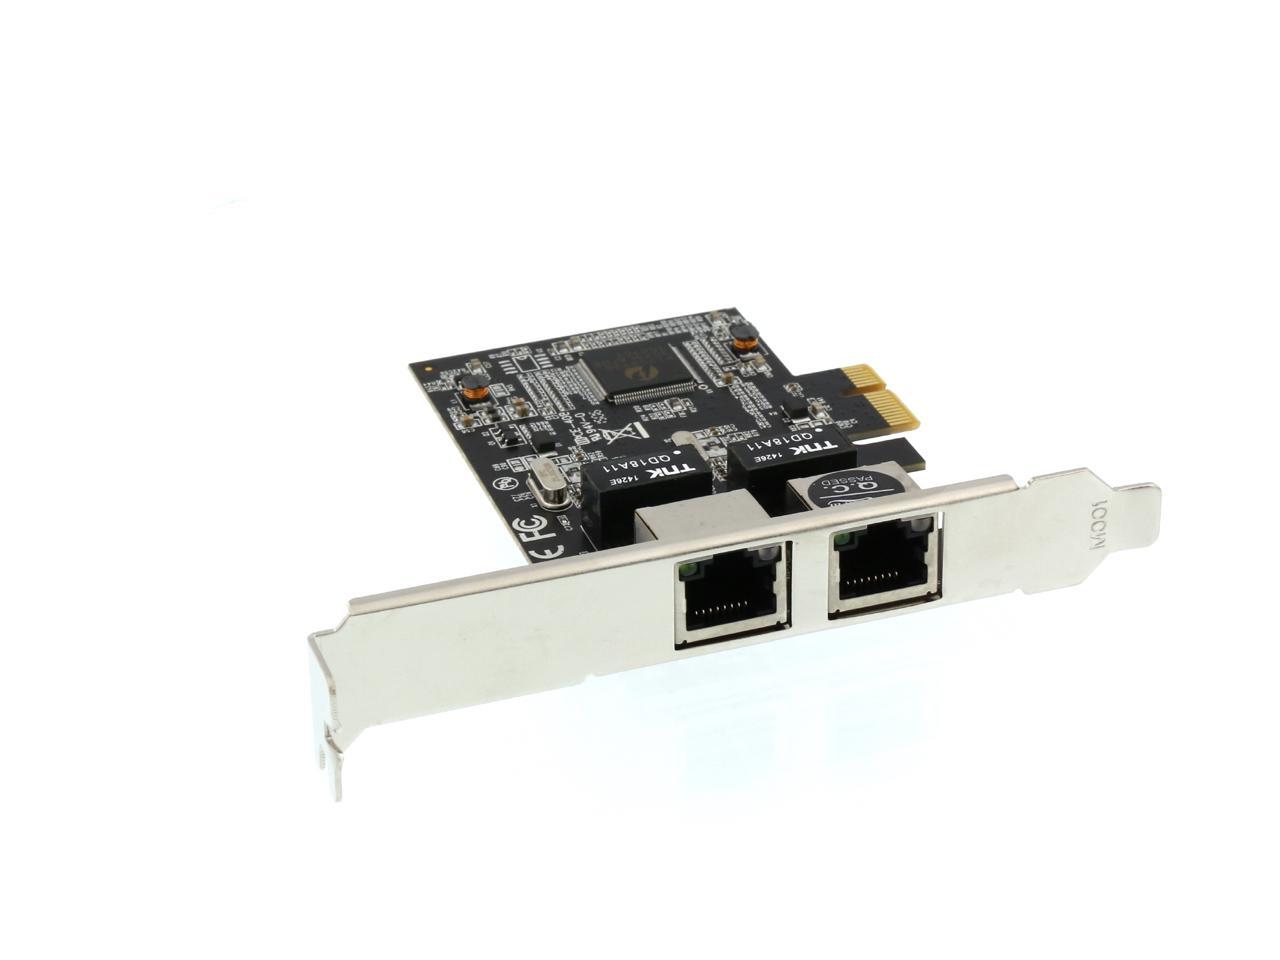 Rosewill RNG-407-Dualv2 PCI-Express Dual Port Gigabit Ethernet Network Adapter 